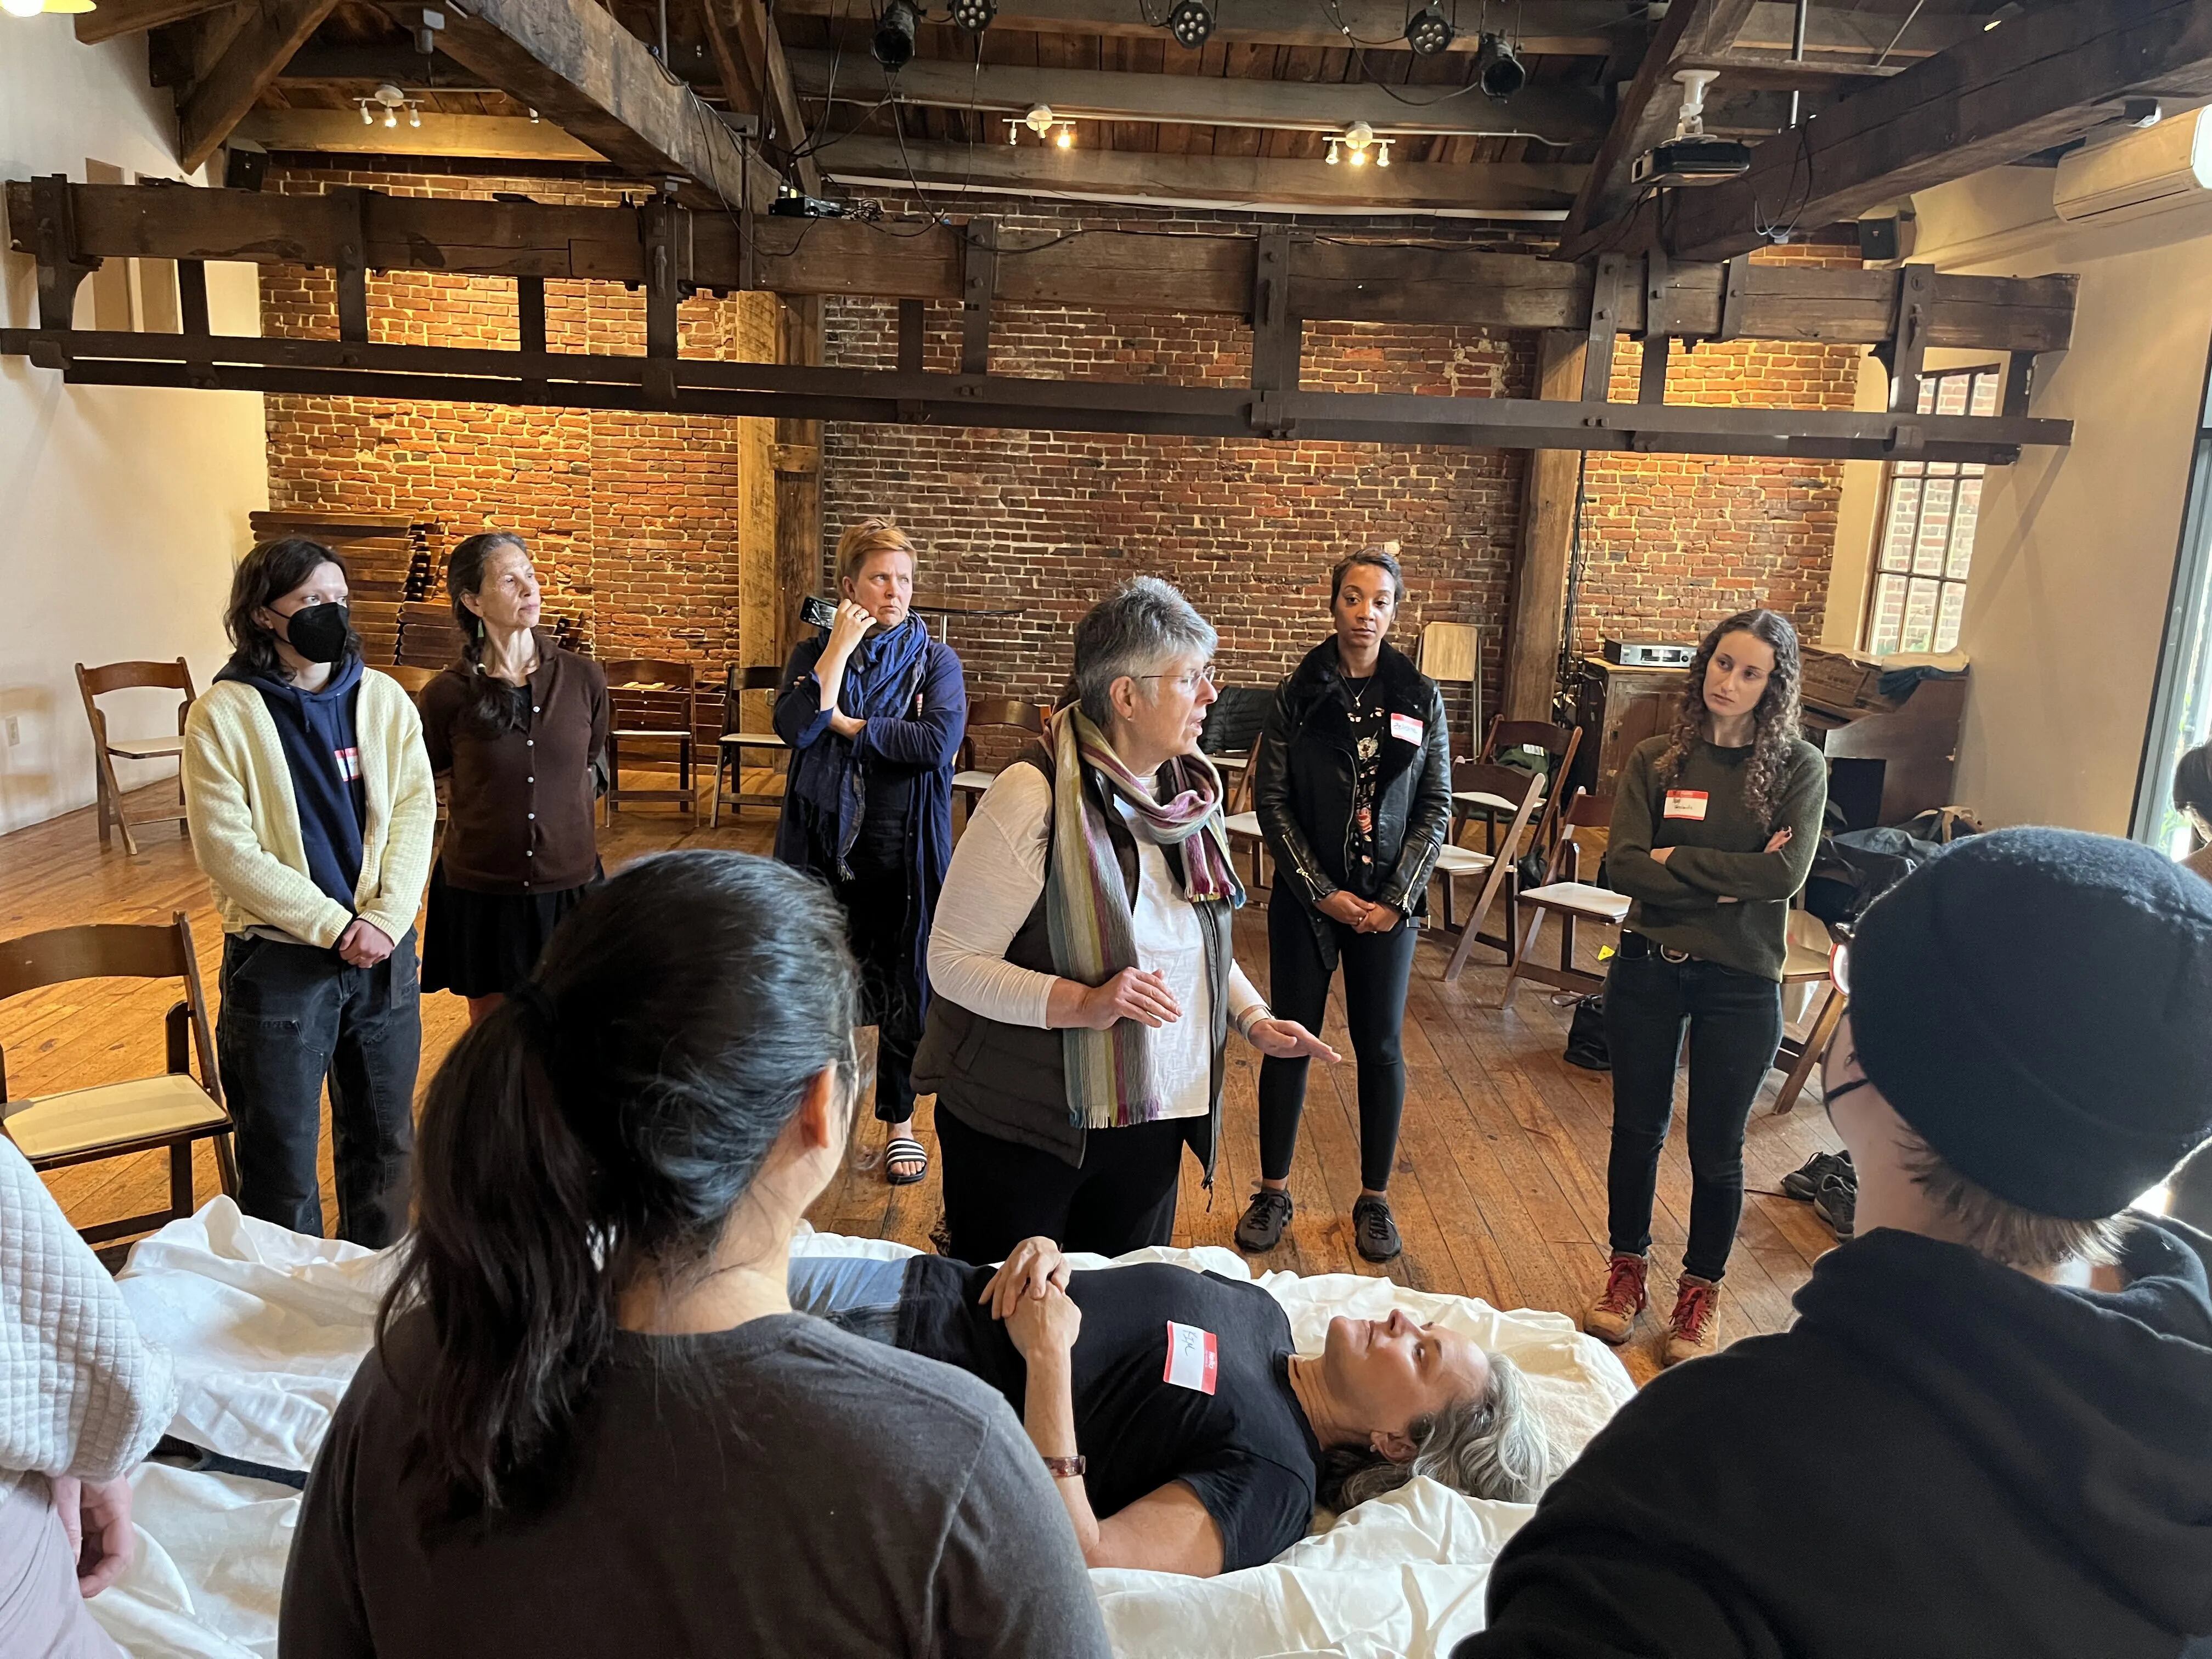 Pat Quigley, center and funeral director at Laurel Hill cemetery, teaches attendees how to shroud a dead body at a recent workshop in Northern Liberties. Kim Schmucki, on the table, volunteered to be practiced on.